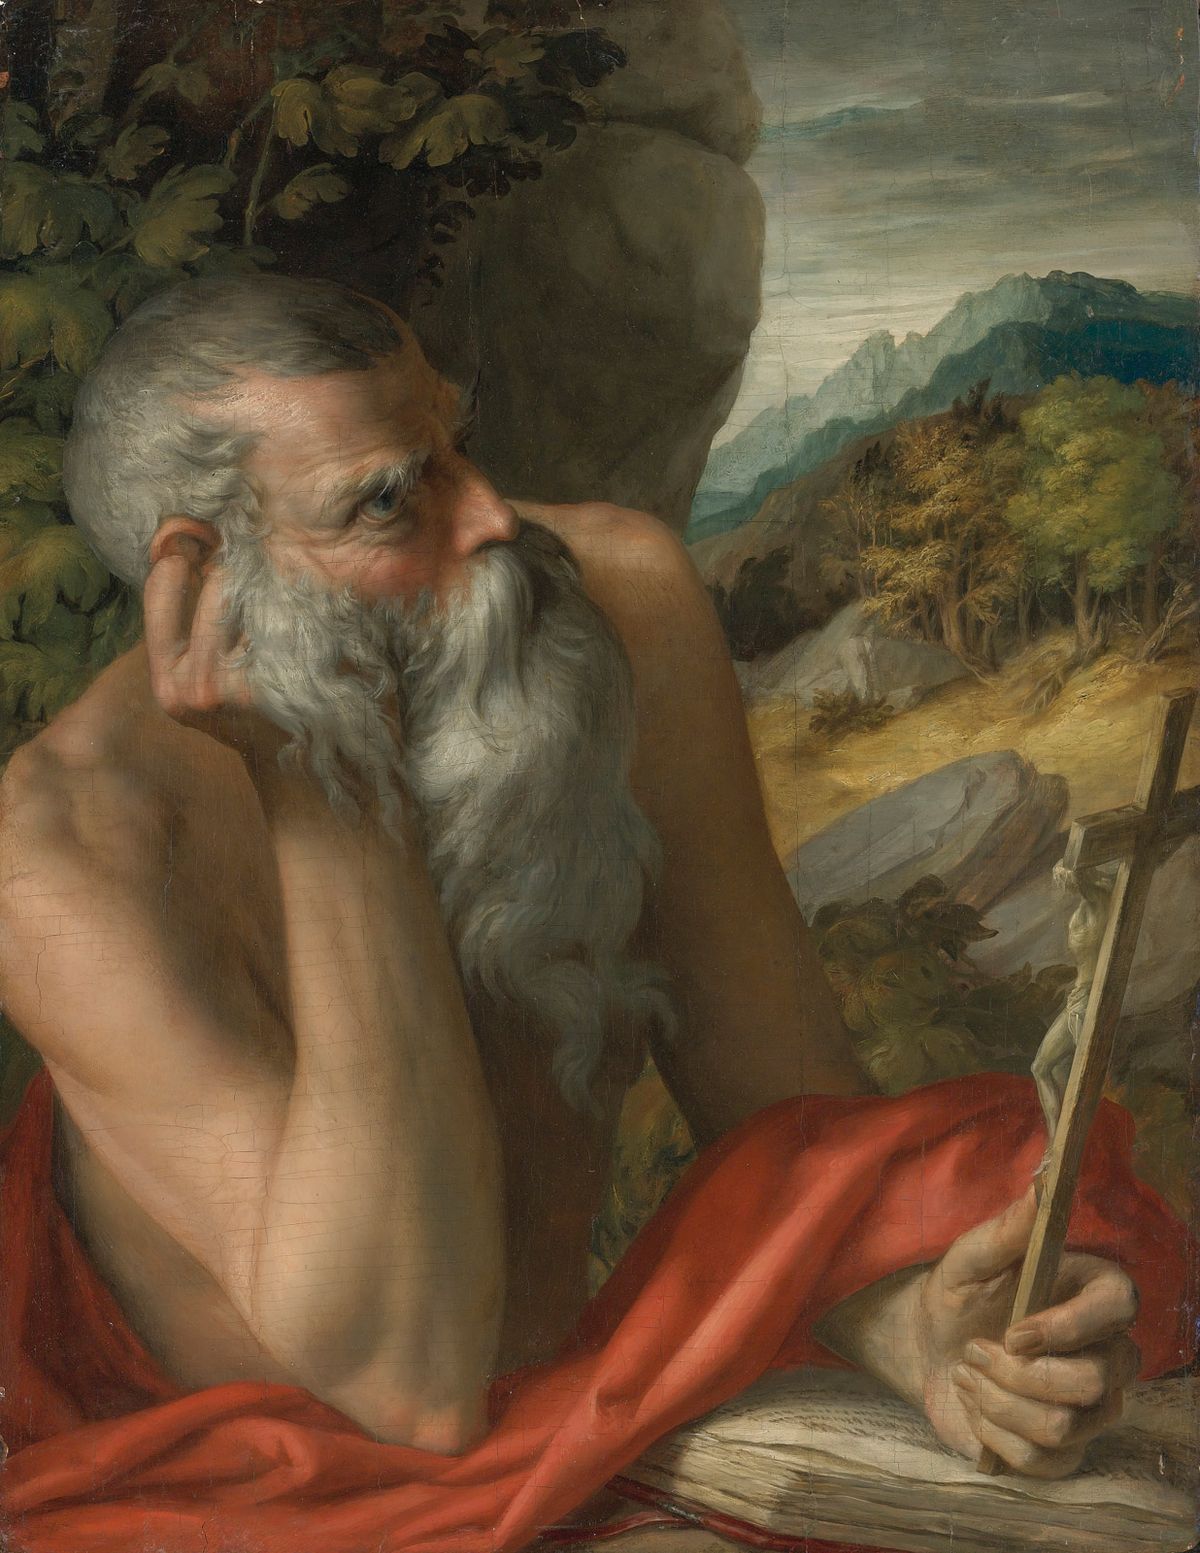 Two separate investigations suggest that Saint Jerome, claimed to be by Parmigianino, is a modern fake Sotheby's